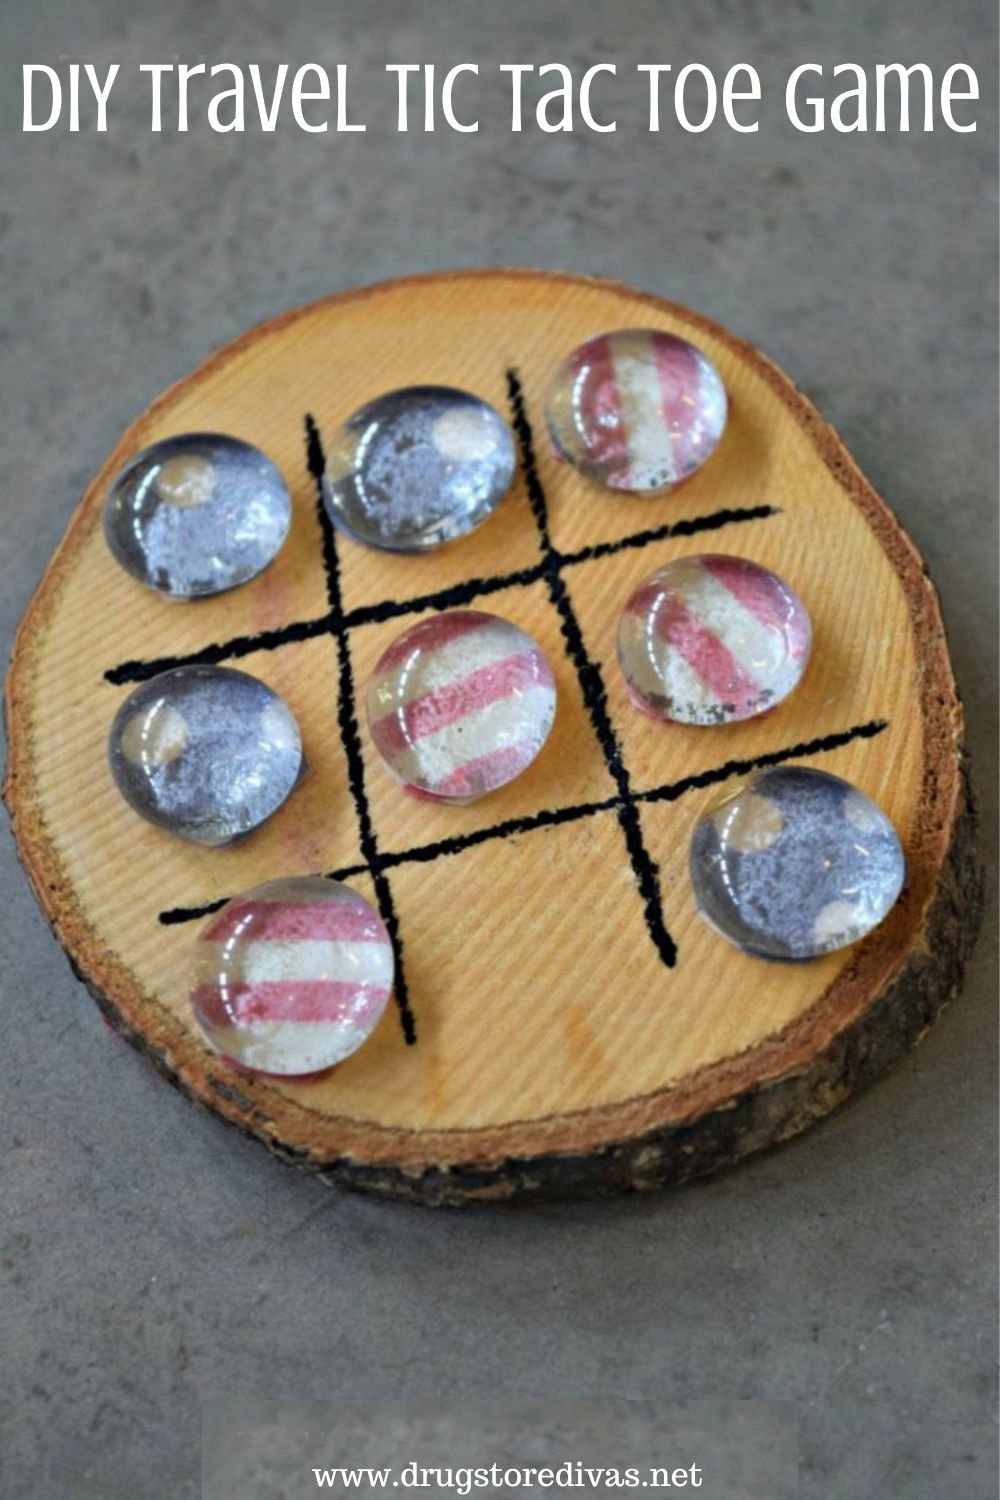 A wooden coaster with a tic tac toe board and pieces on it with the words 